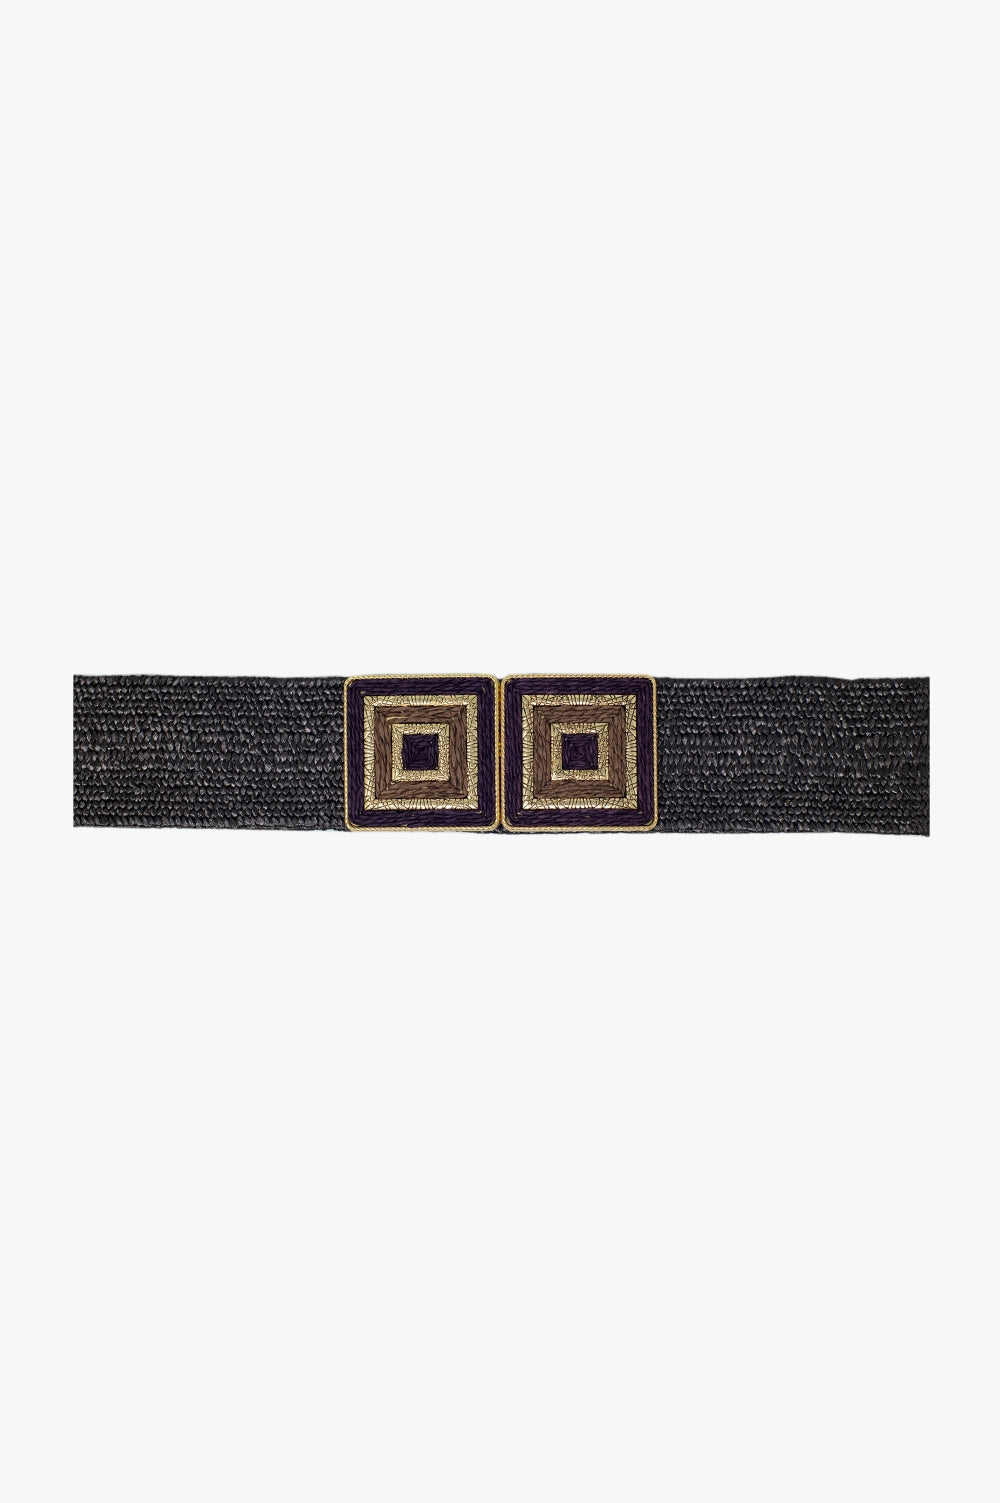 Q2 Brown woven belt with square buckle with gold details